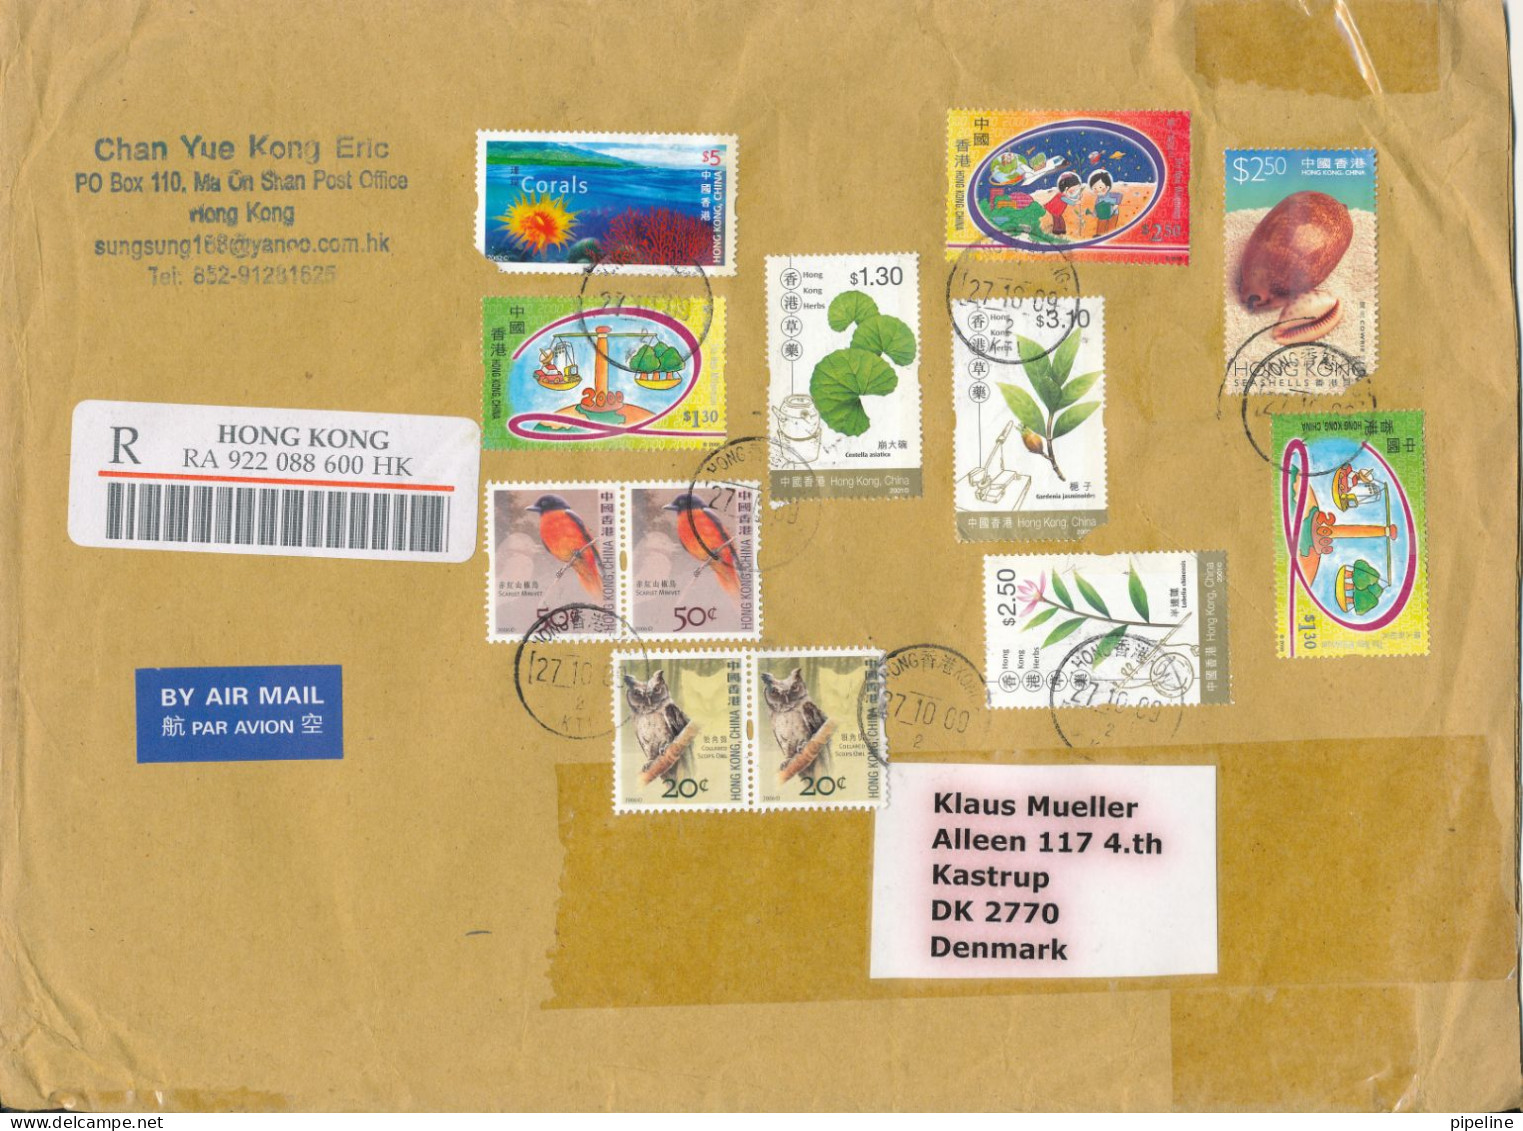 Hong Kong Registered Cover Sent Air Mail To Denmark 27-10-2009 Topic Stamps Big Size Cover 2 Stamps Are Damaged - Brieven En Documenten